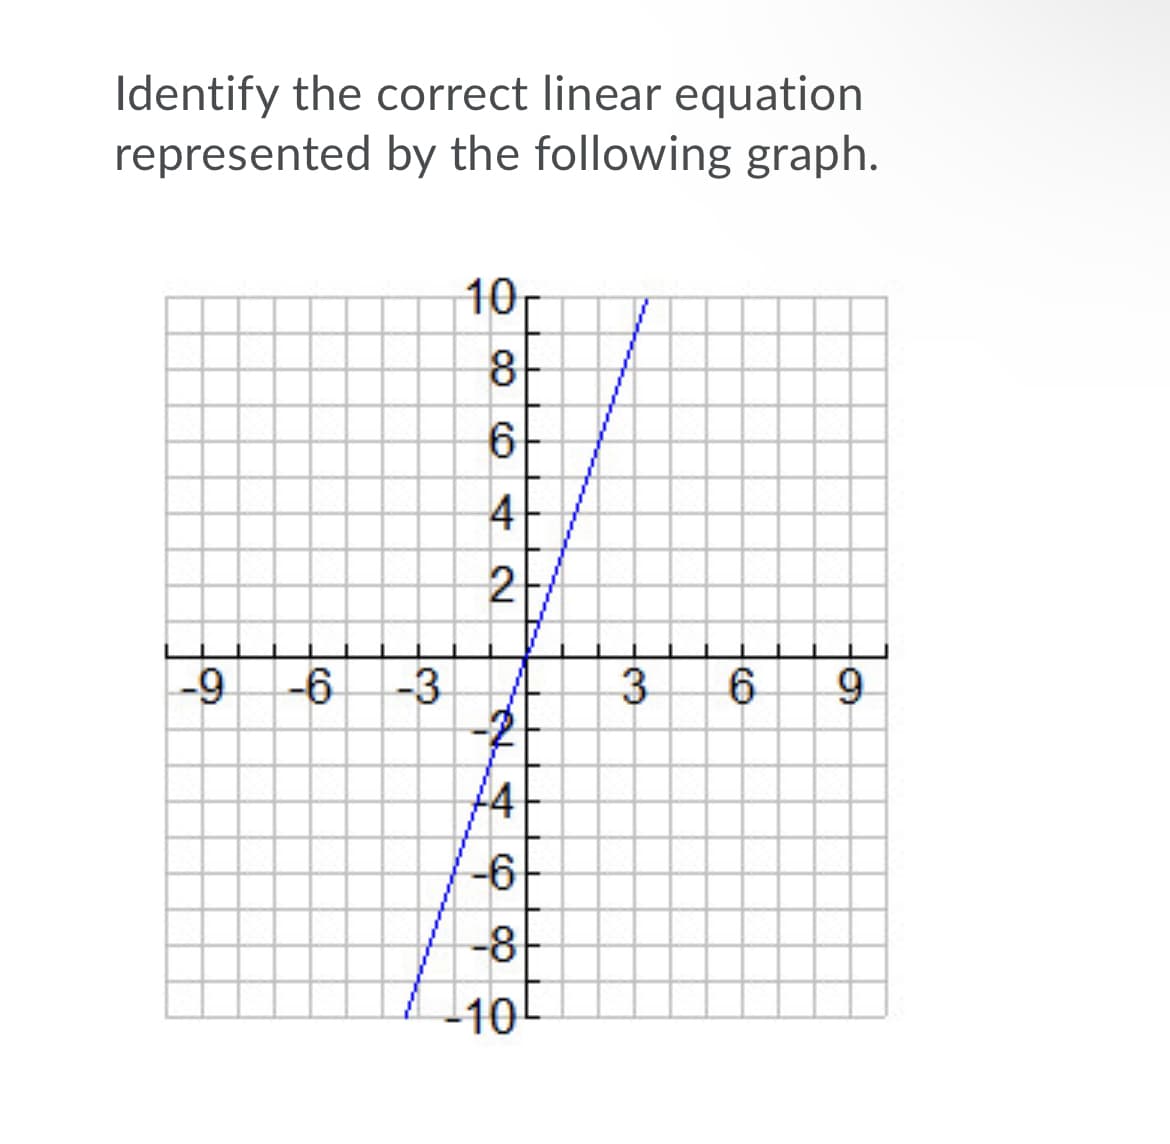 Identify the correct linear equation
represented by the following graph.
10
8
6
4
2
-9
-6
-3
6.
14
-아
-8
10
3.
